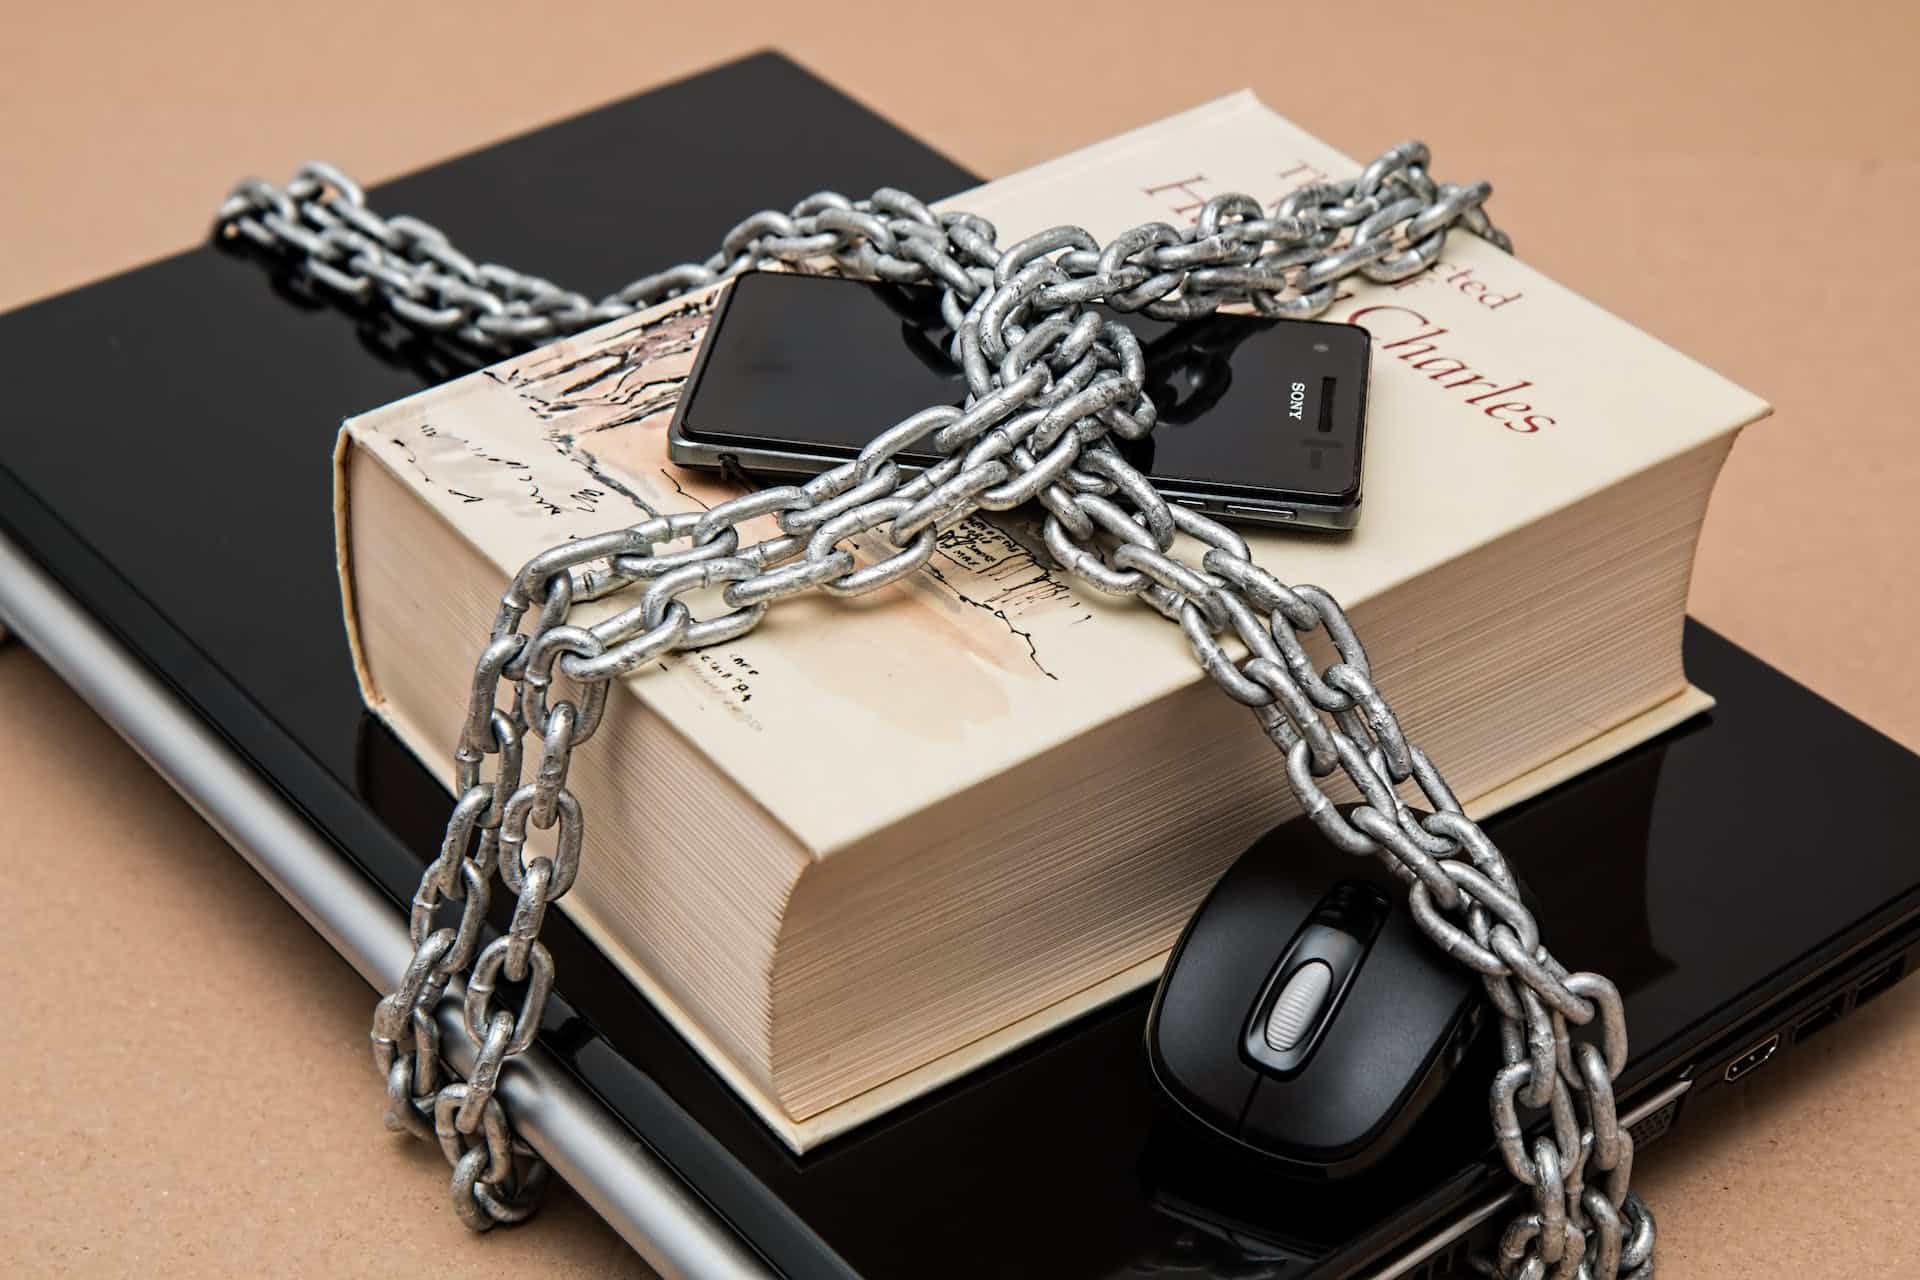 A laptop, book, phone, and computer mouse chained together with a thick chain.